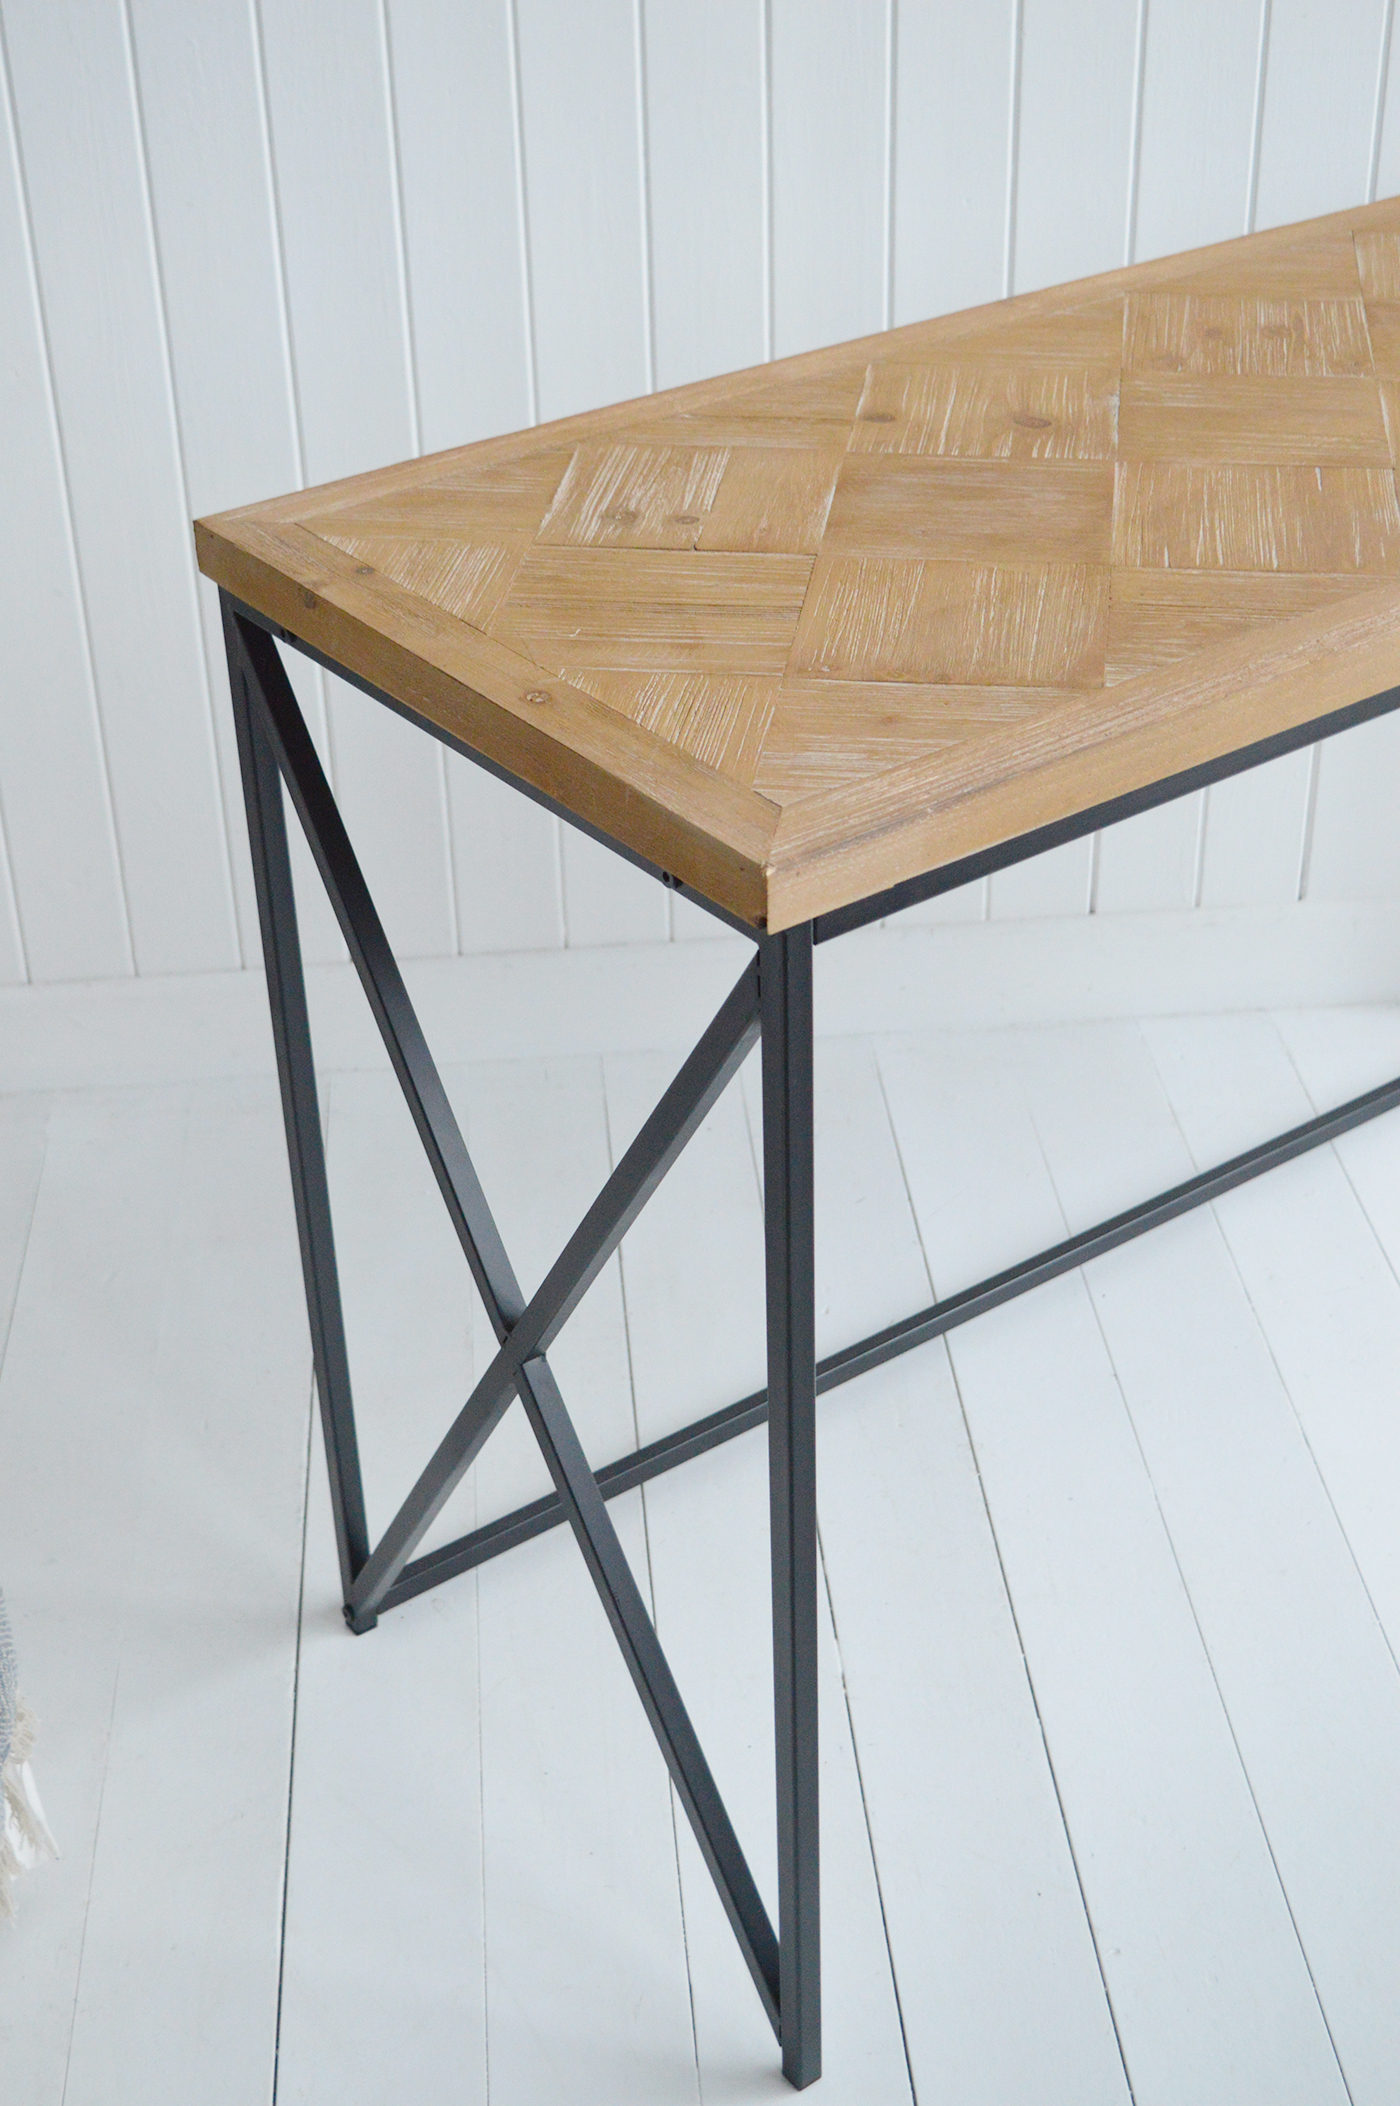 Stockbridge Parquet console Table - New England Modern Country and Farmhouse Furniture and Interiors